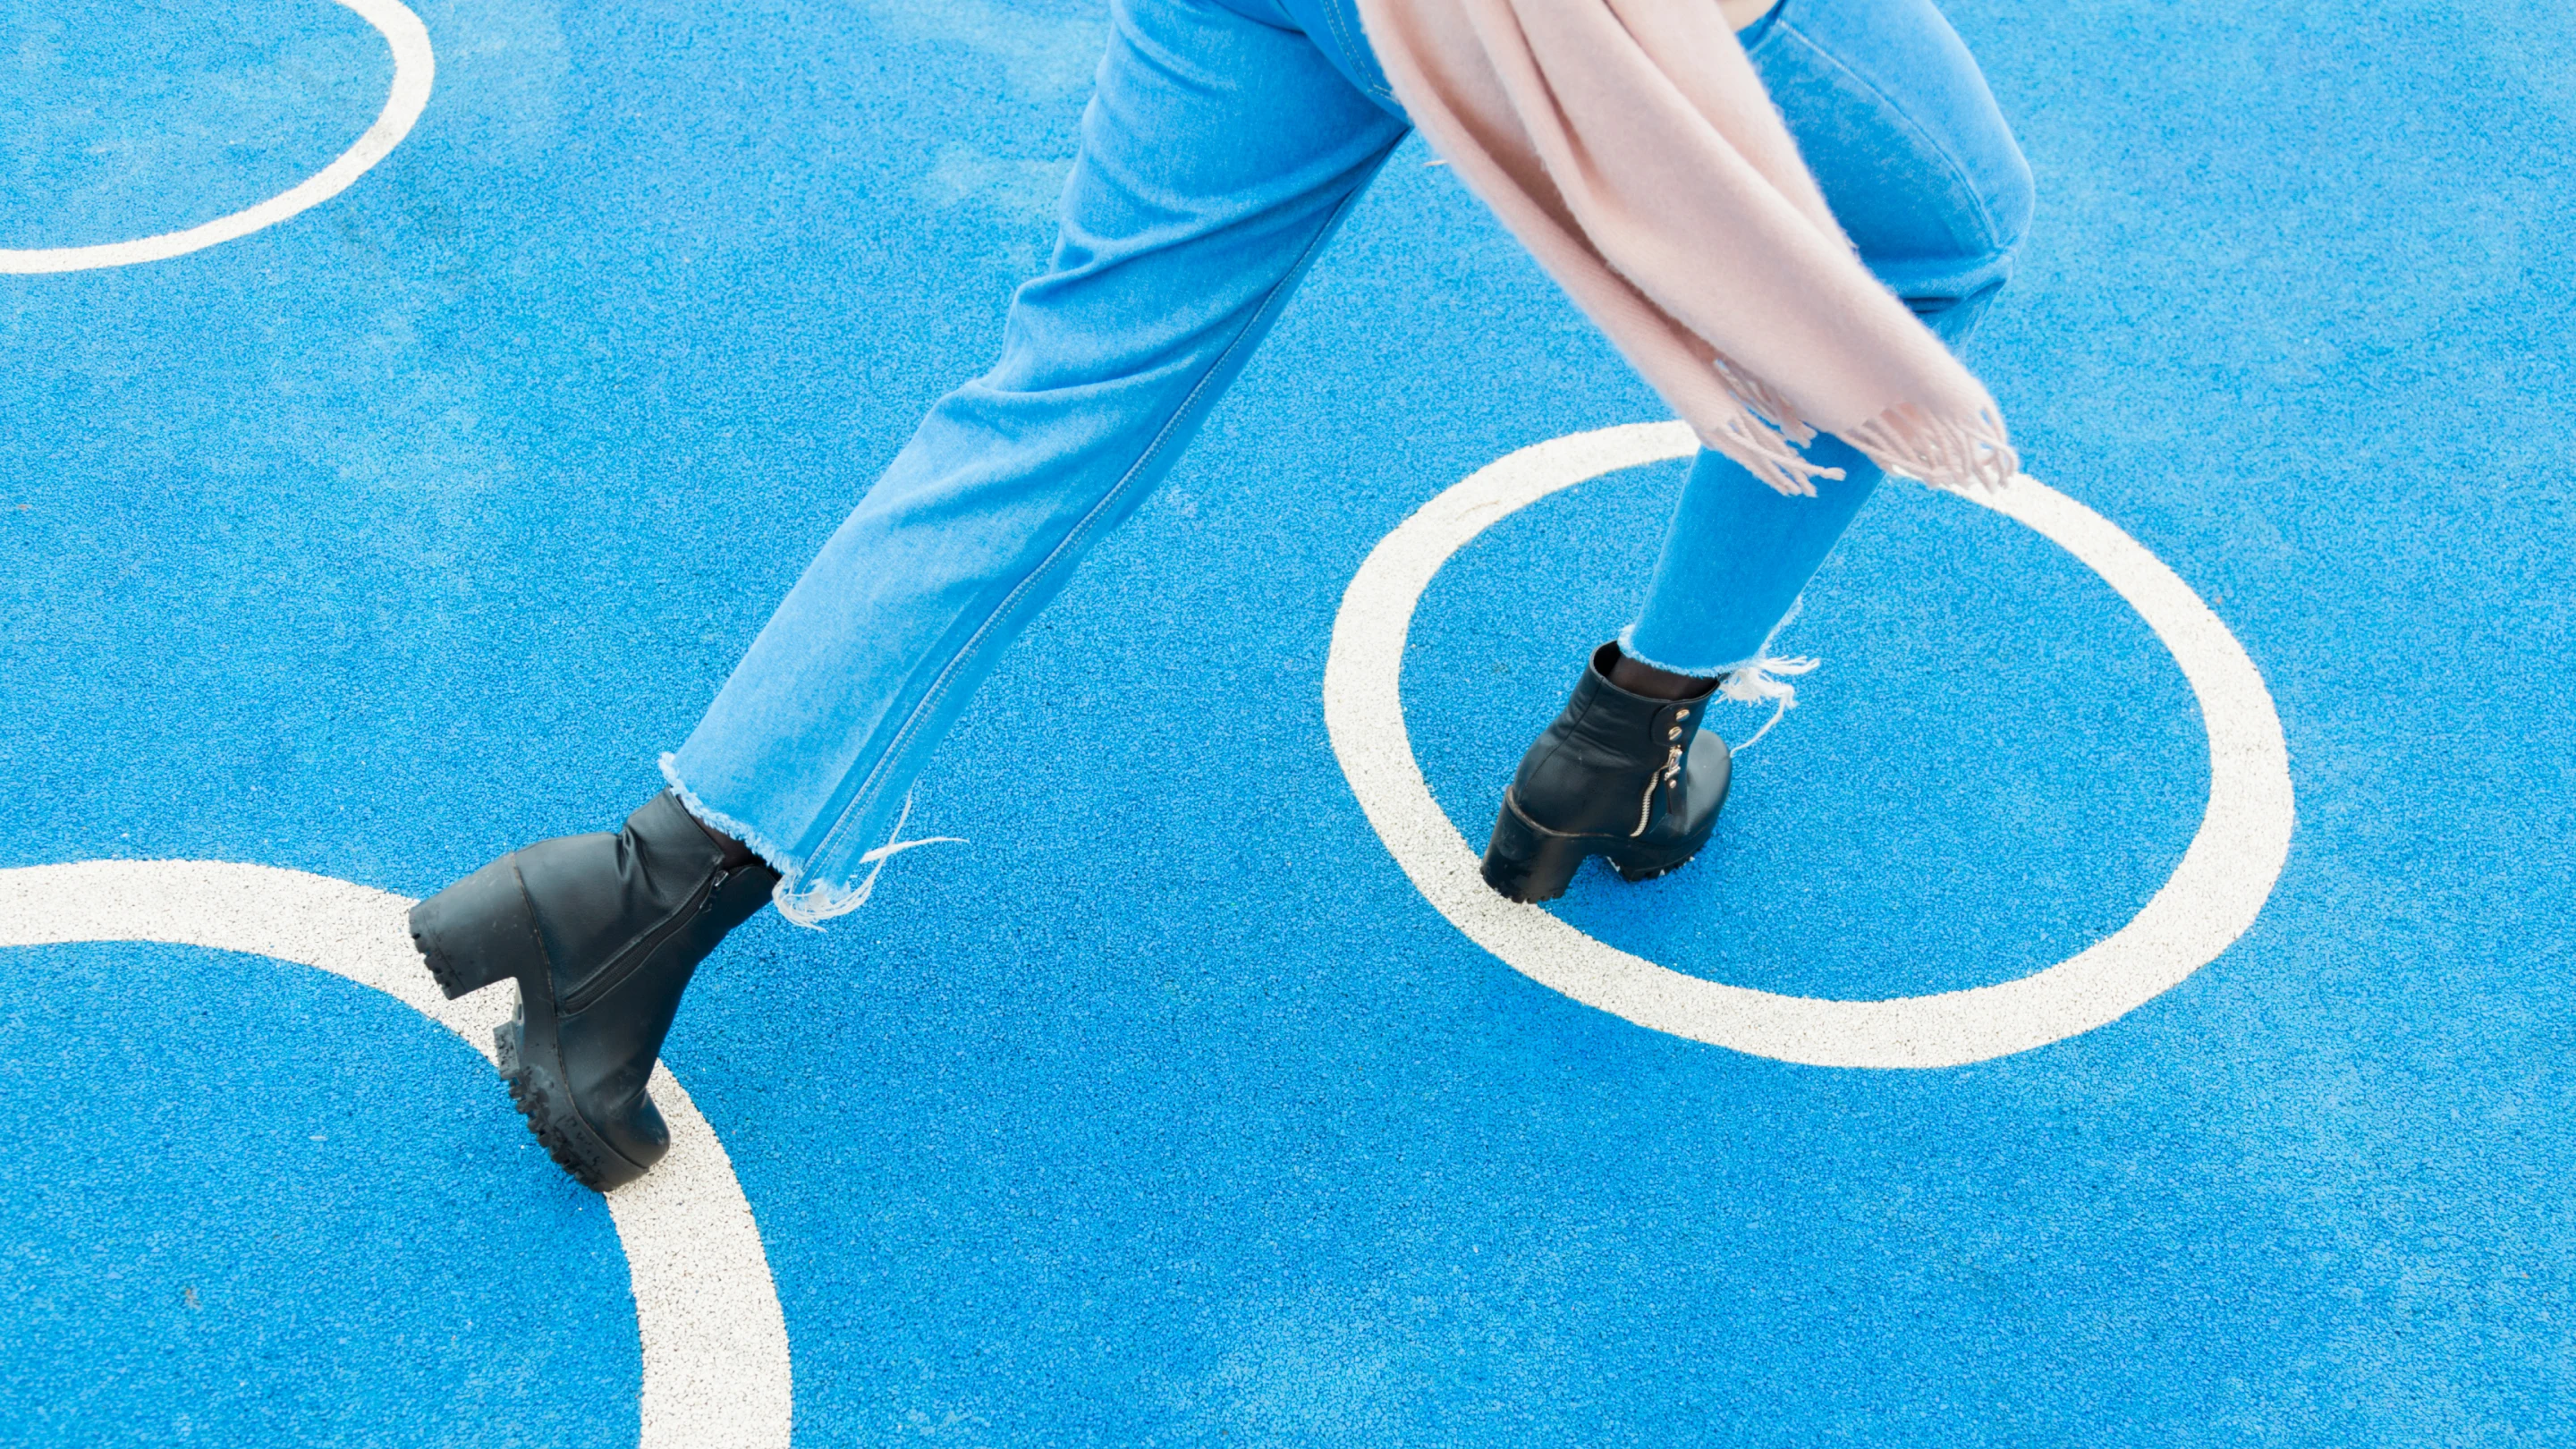 Woman in jeans and black boots runs across blue rubber ground of a playground, over three large white circle, her pink scarf blowing into frame.